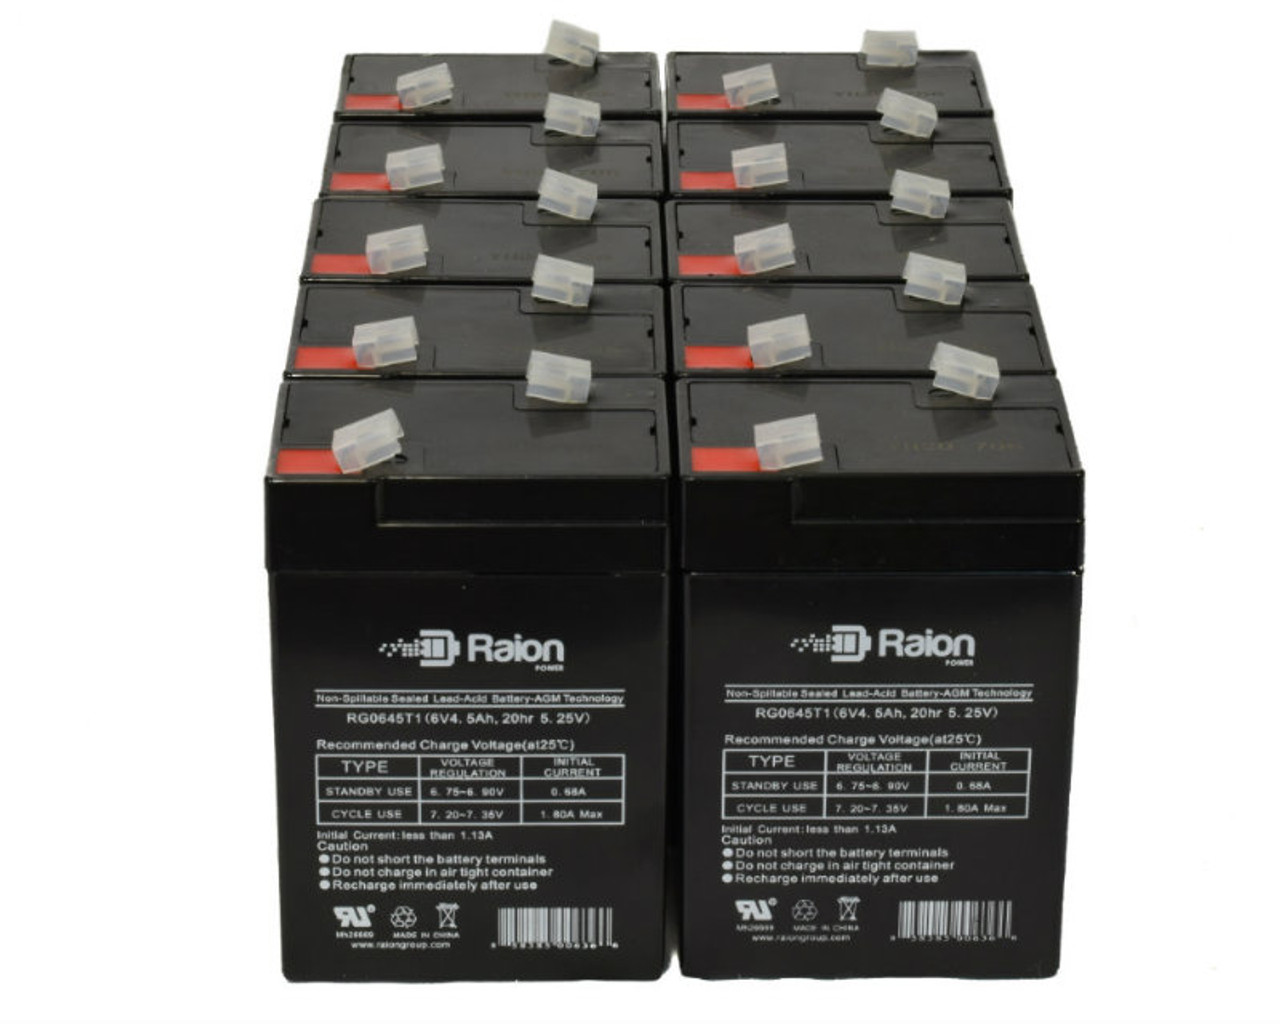 Raion Power 6 Volt 4.5Ah RG0645T1 Replacement Battery for Kaiying KS4.2-6A - 10 Pack